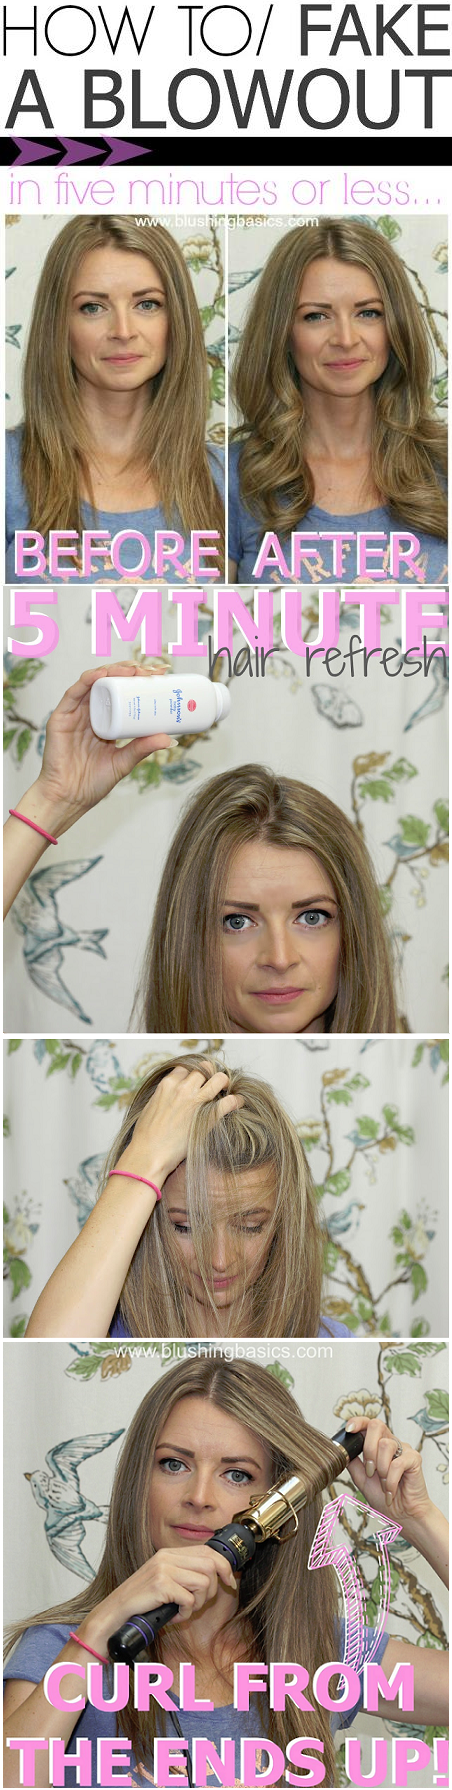 How to Fake A Blowout